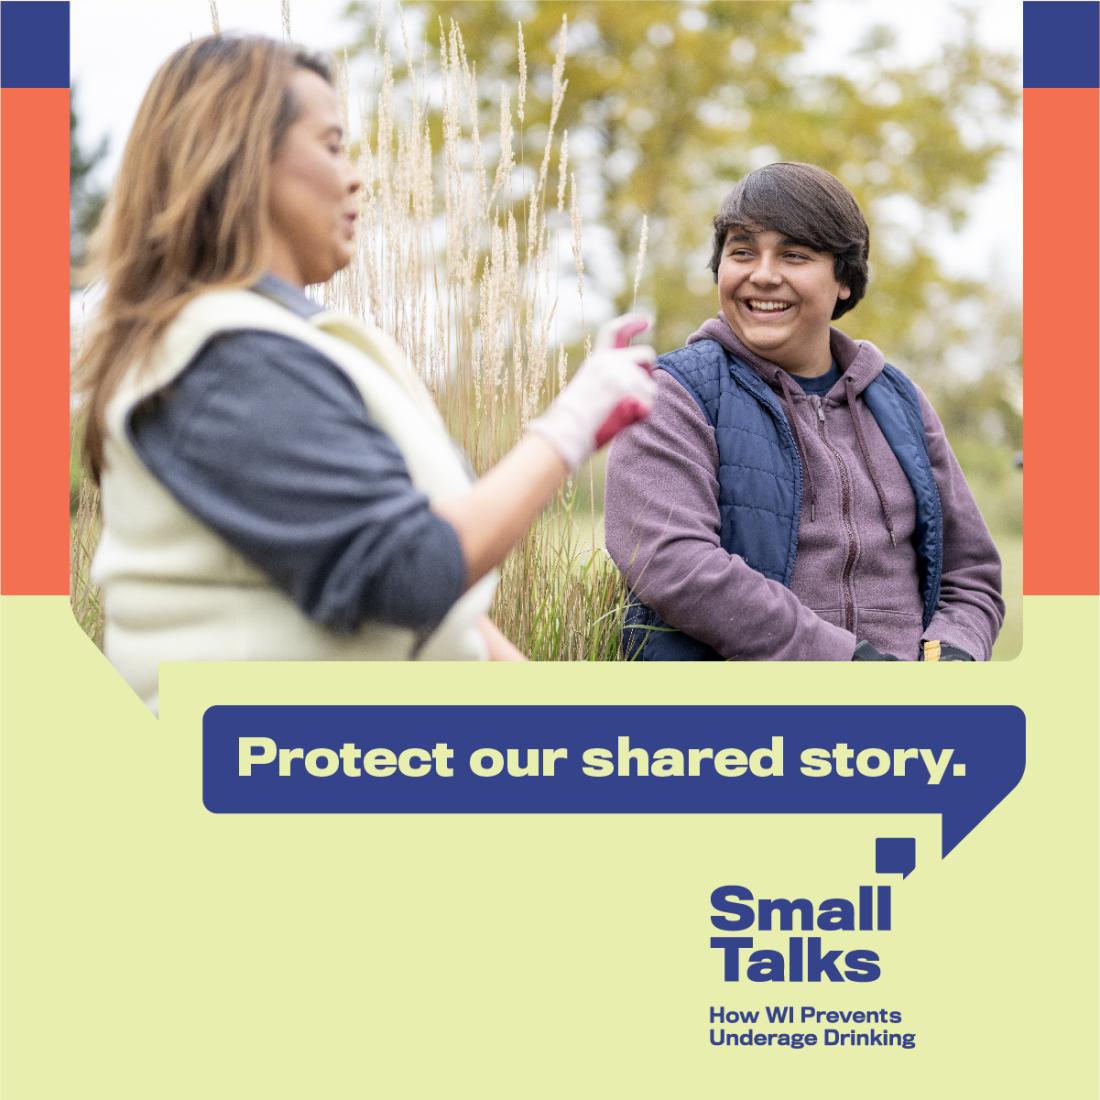 Protect our shared story: adult with child.